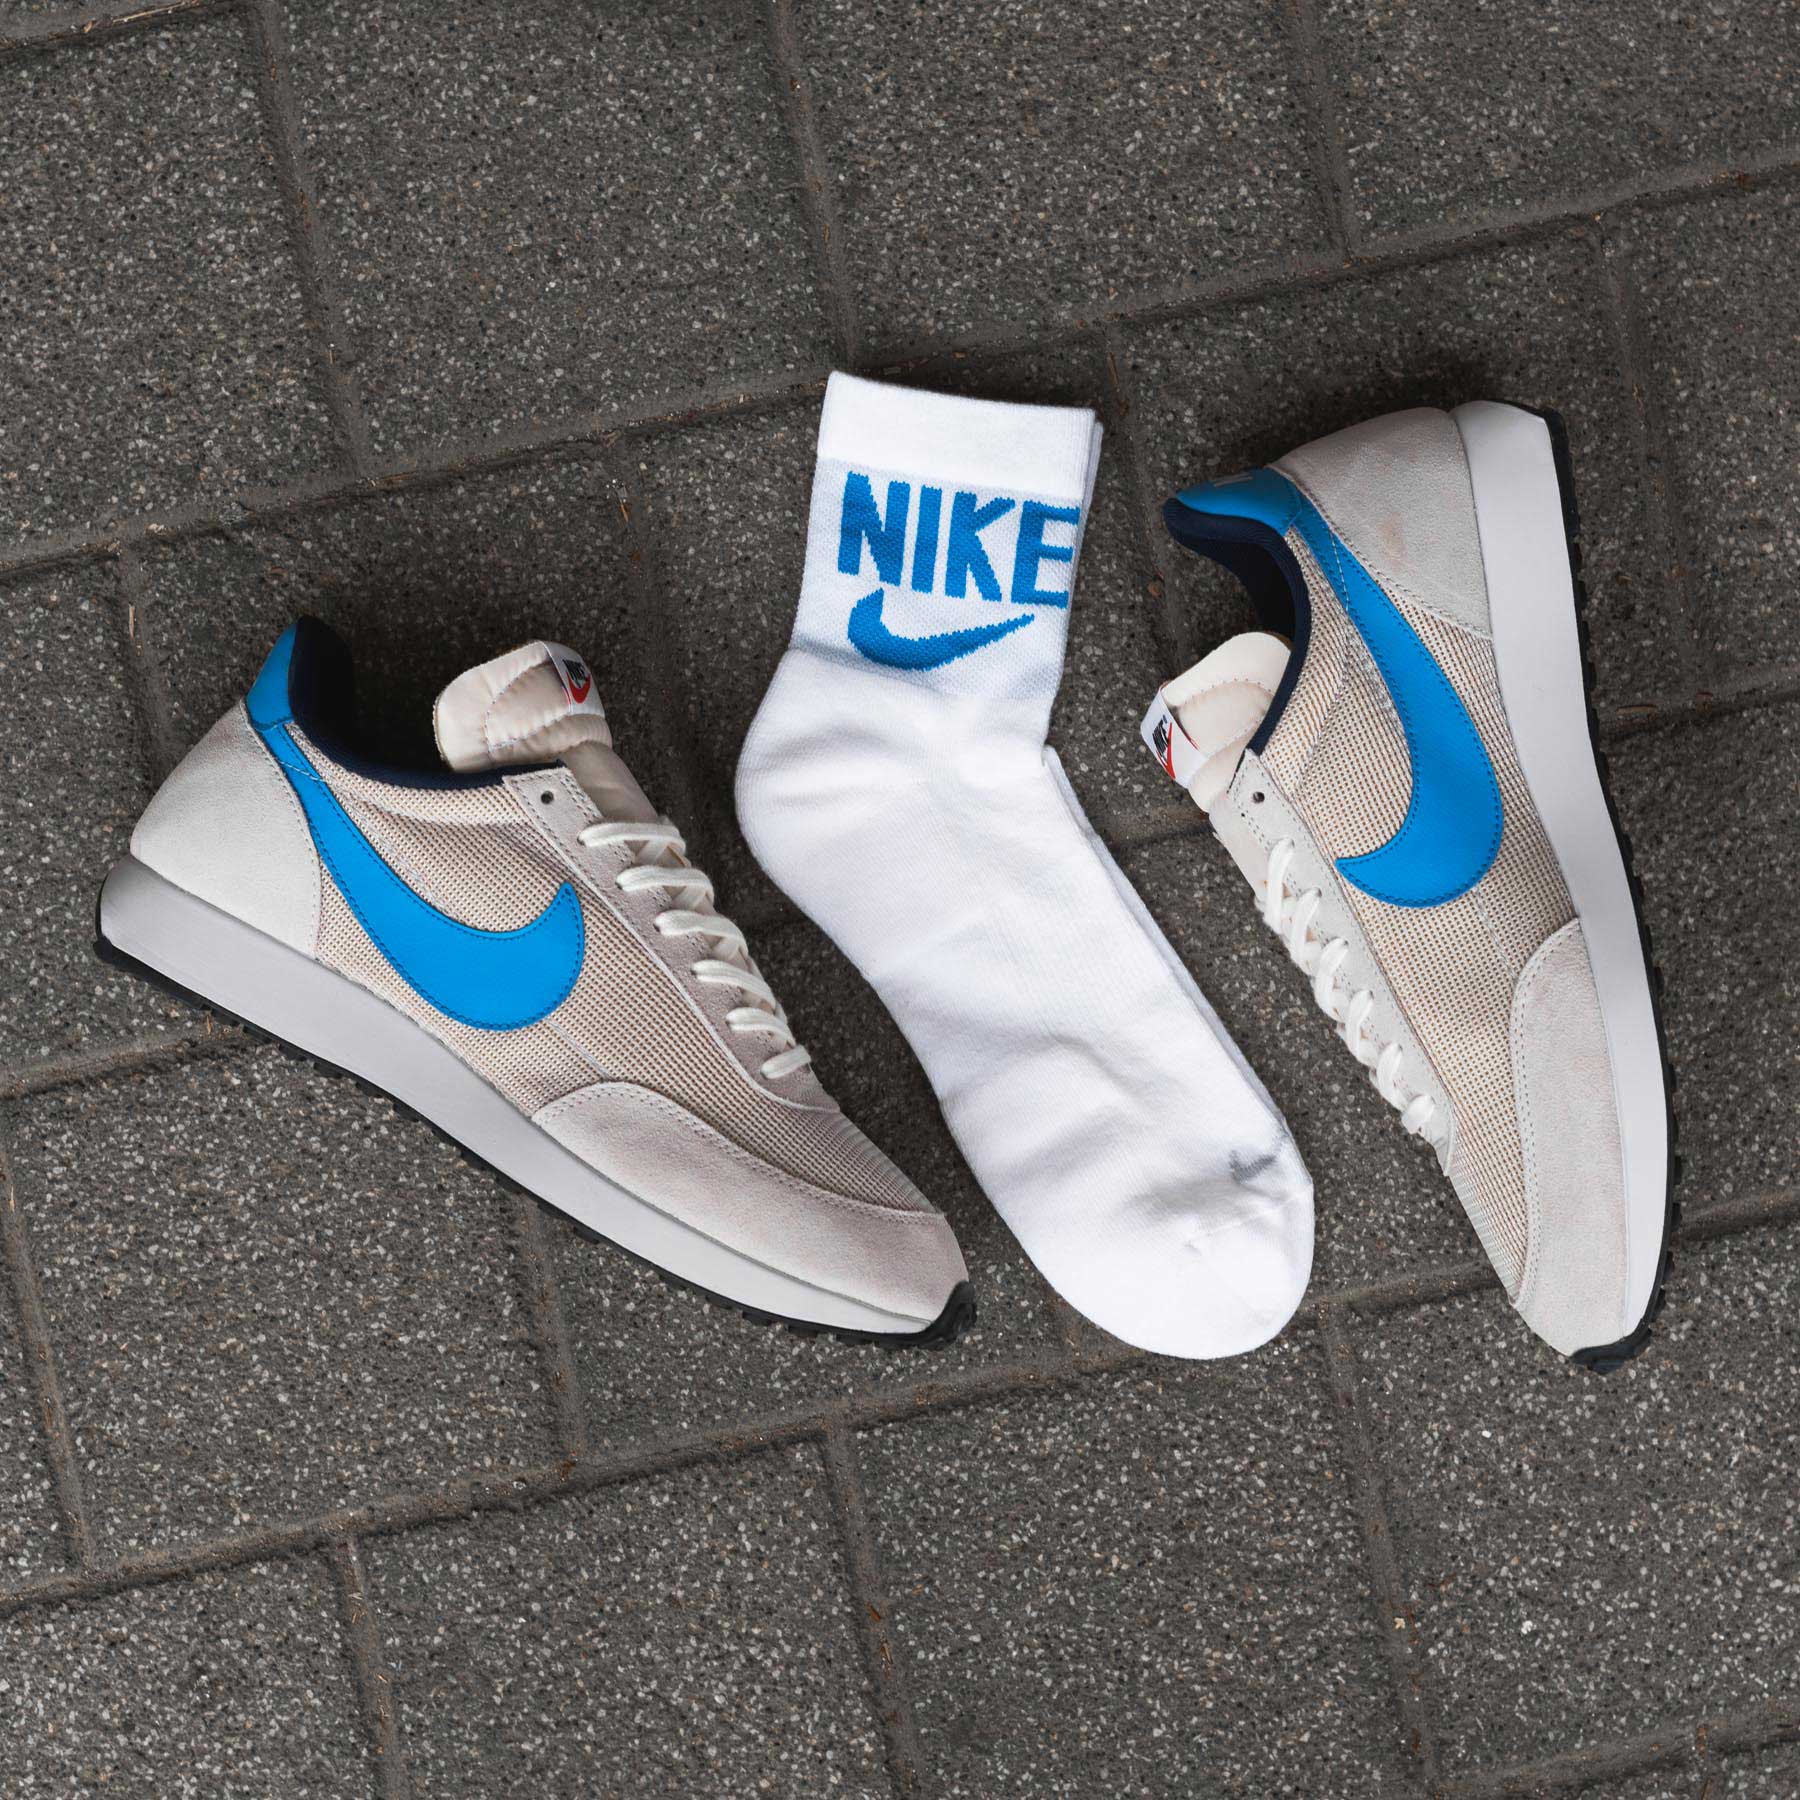 Nike Air Tailwind: You Need and